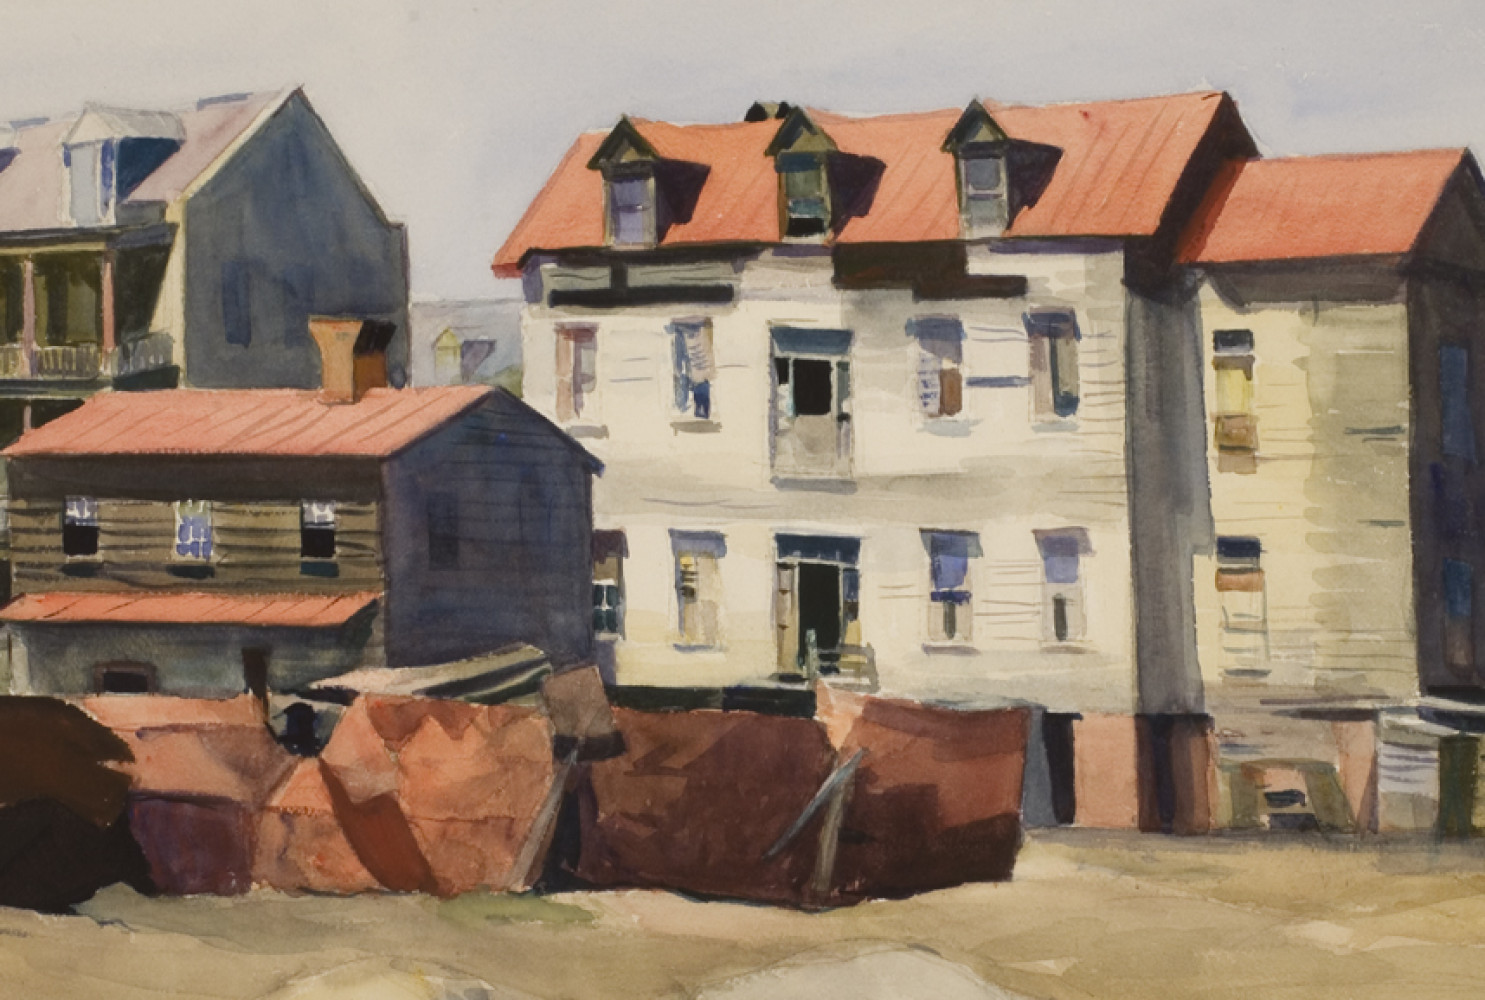 Charleston Slum (detail), 1929, By Edward Hopper (American, 1882-1967), Watercolor on paper, 16 x 24 inches, Private collection